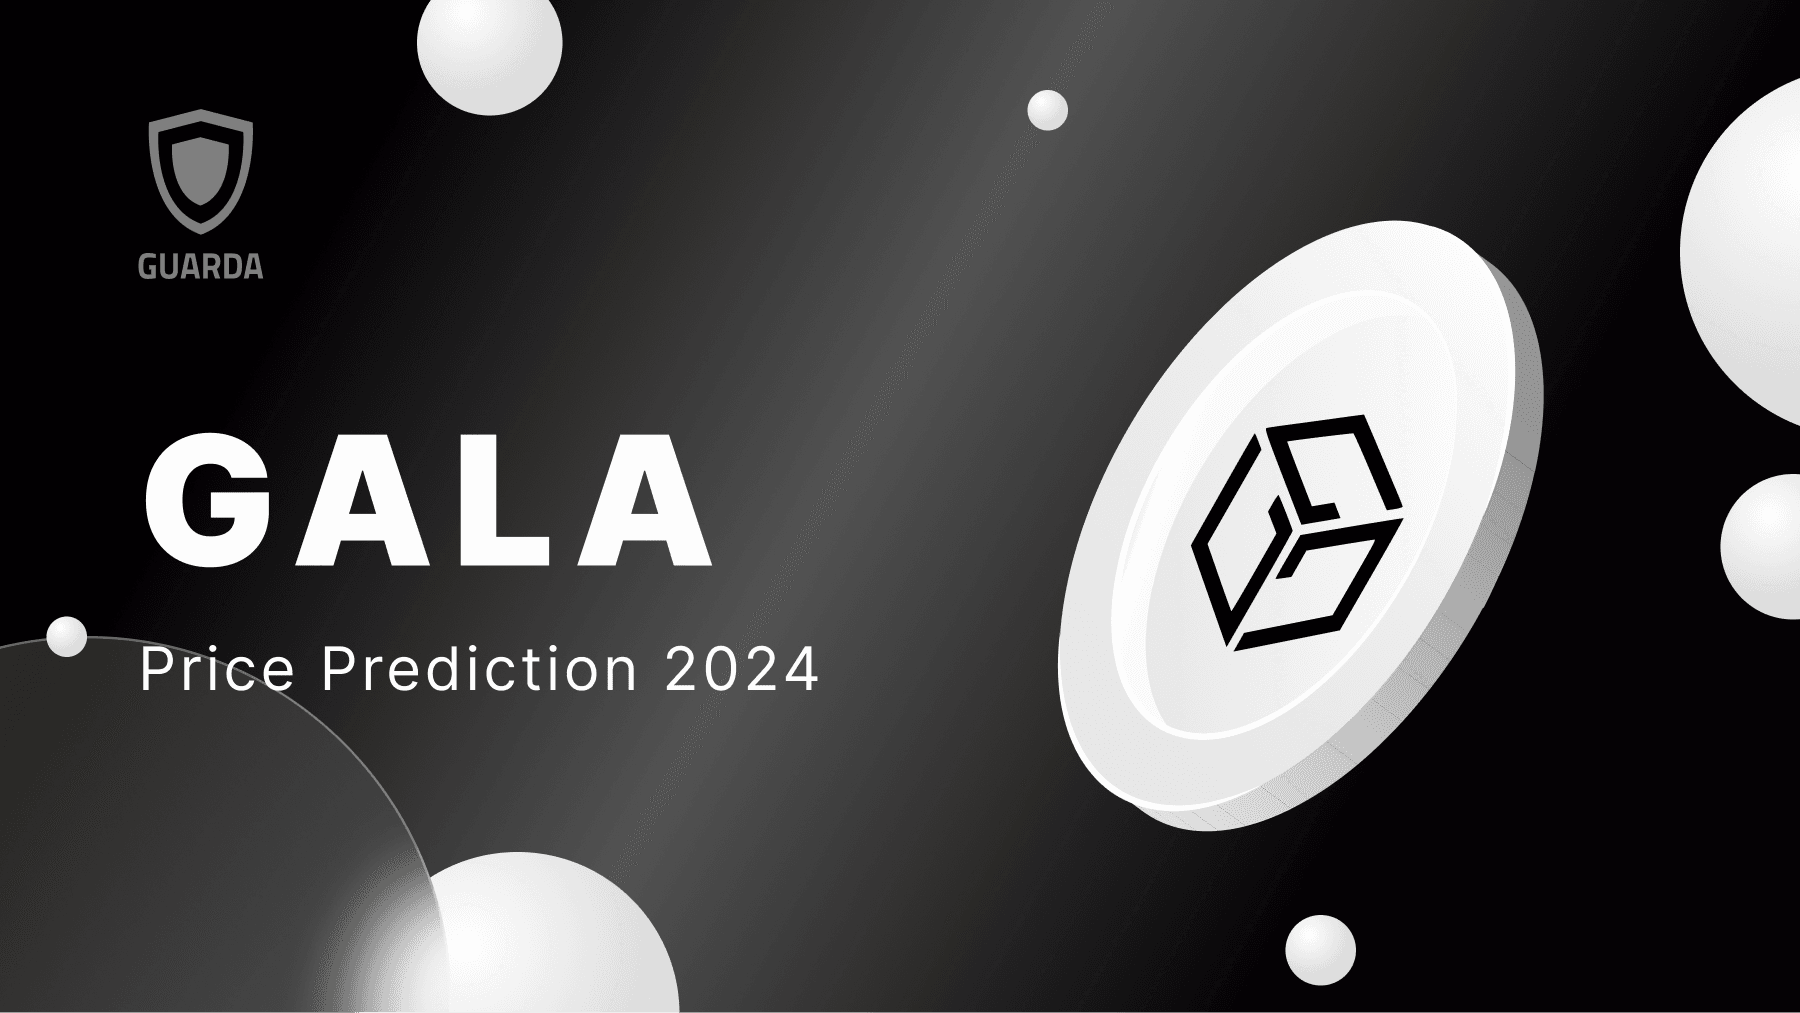 GALA Price Prediction 2024: Trends and Insights